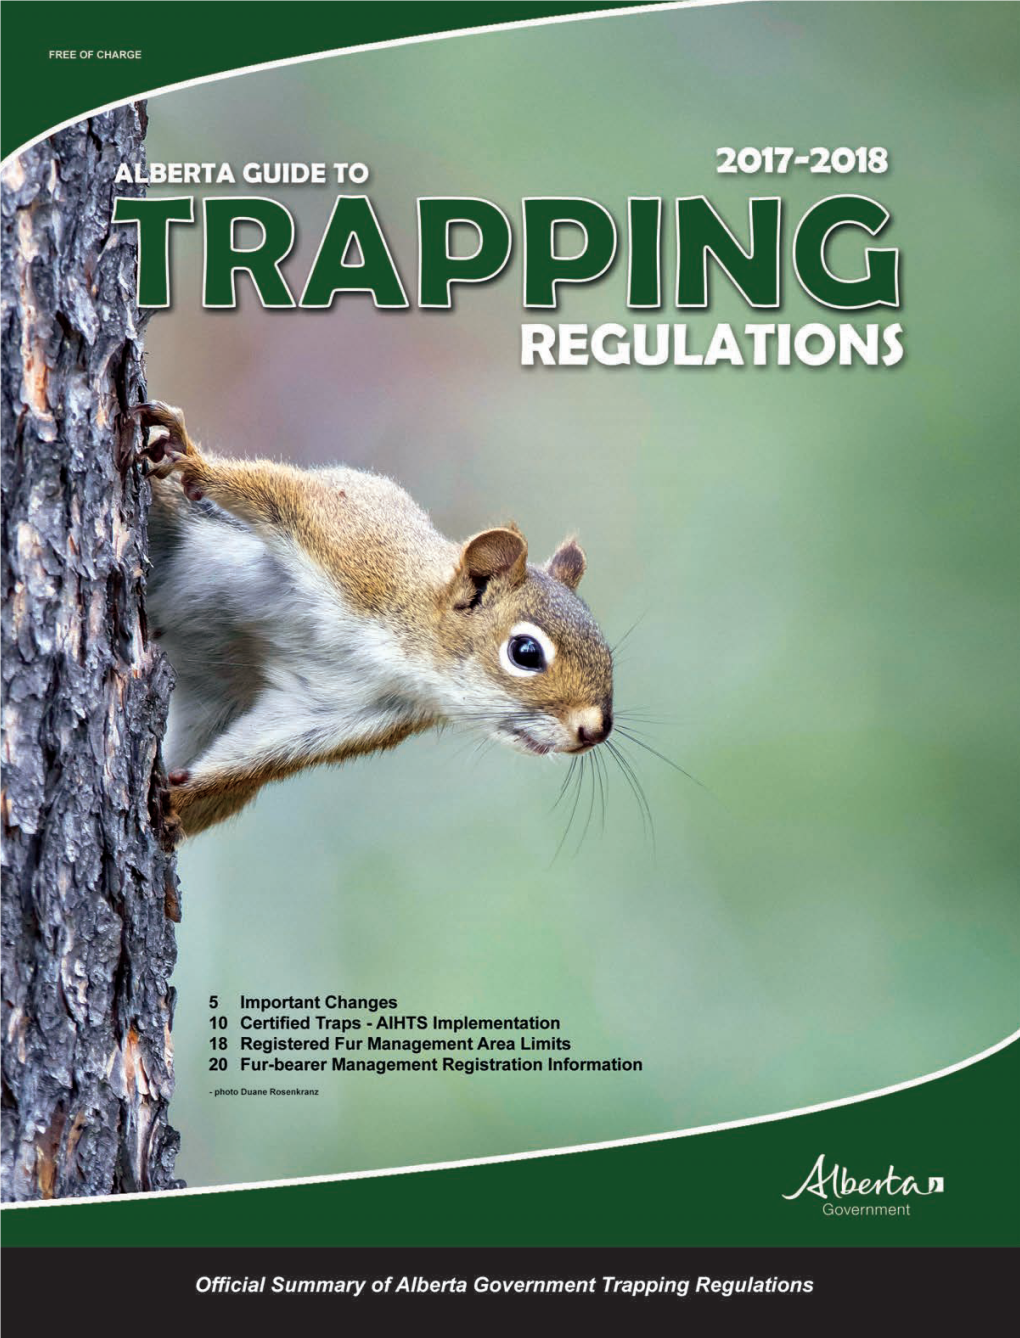 Alberta Guide to Trapping Regulations 2017-2018